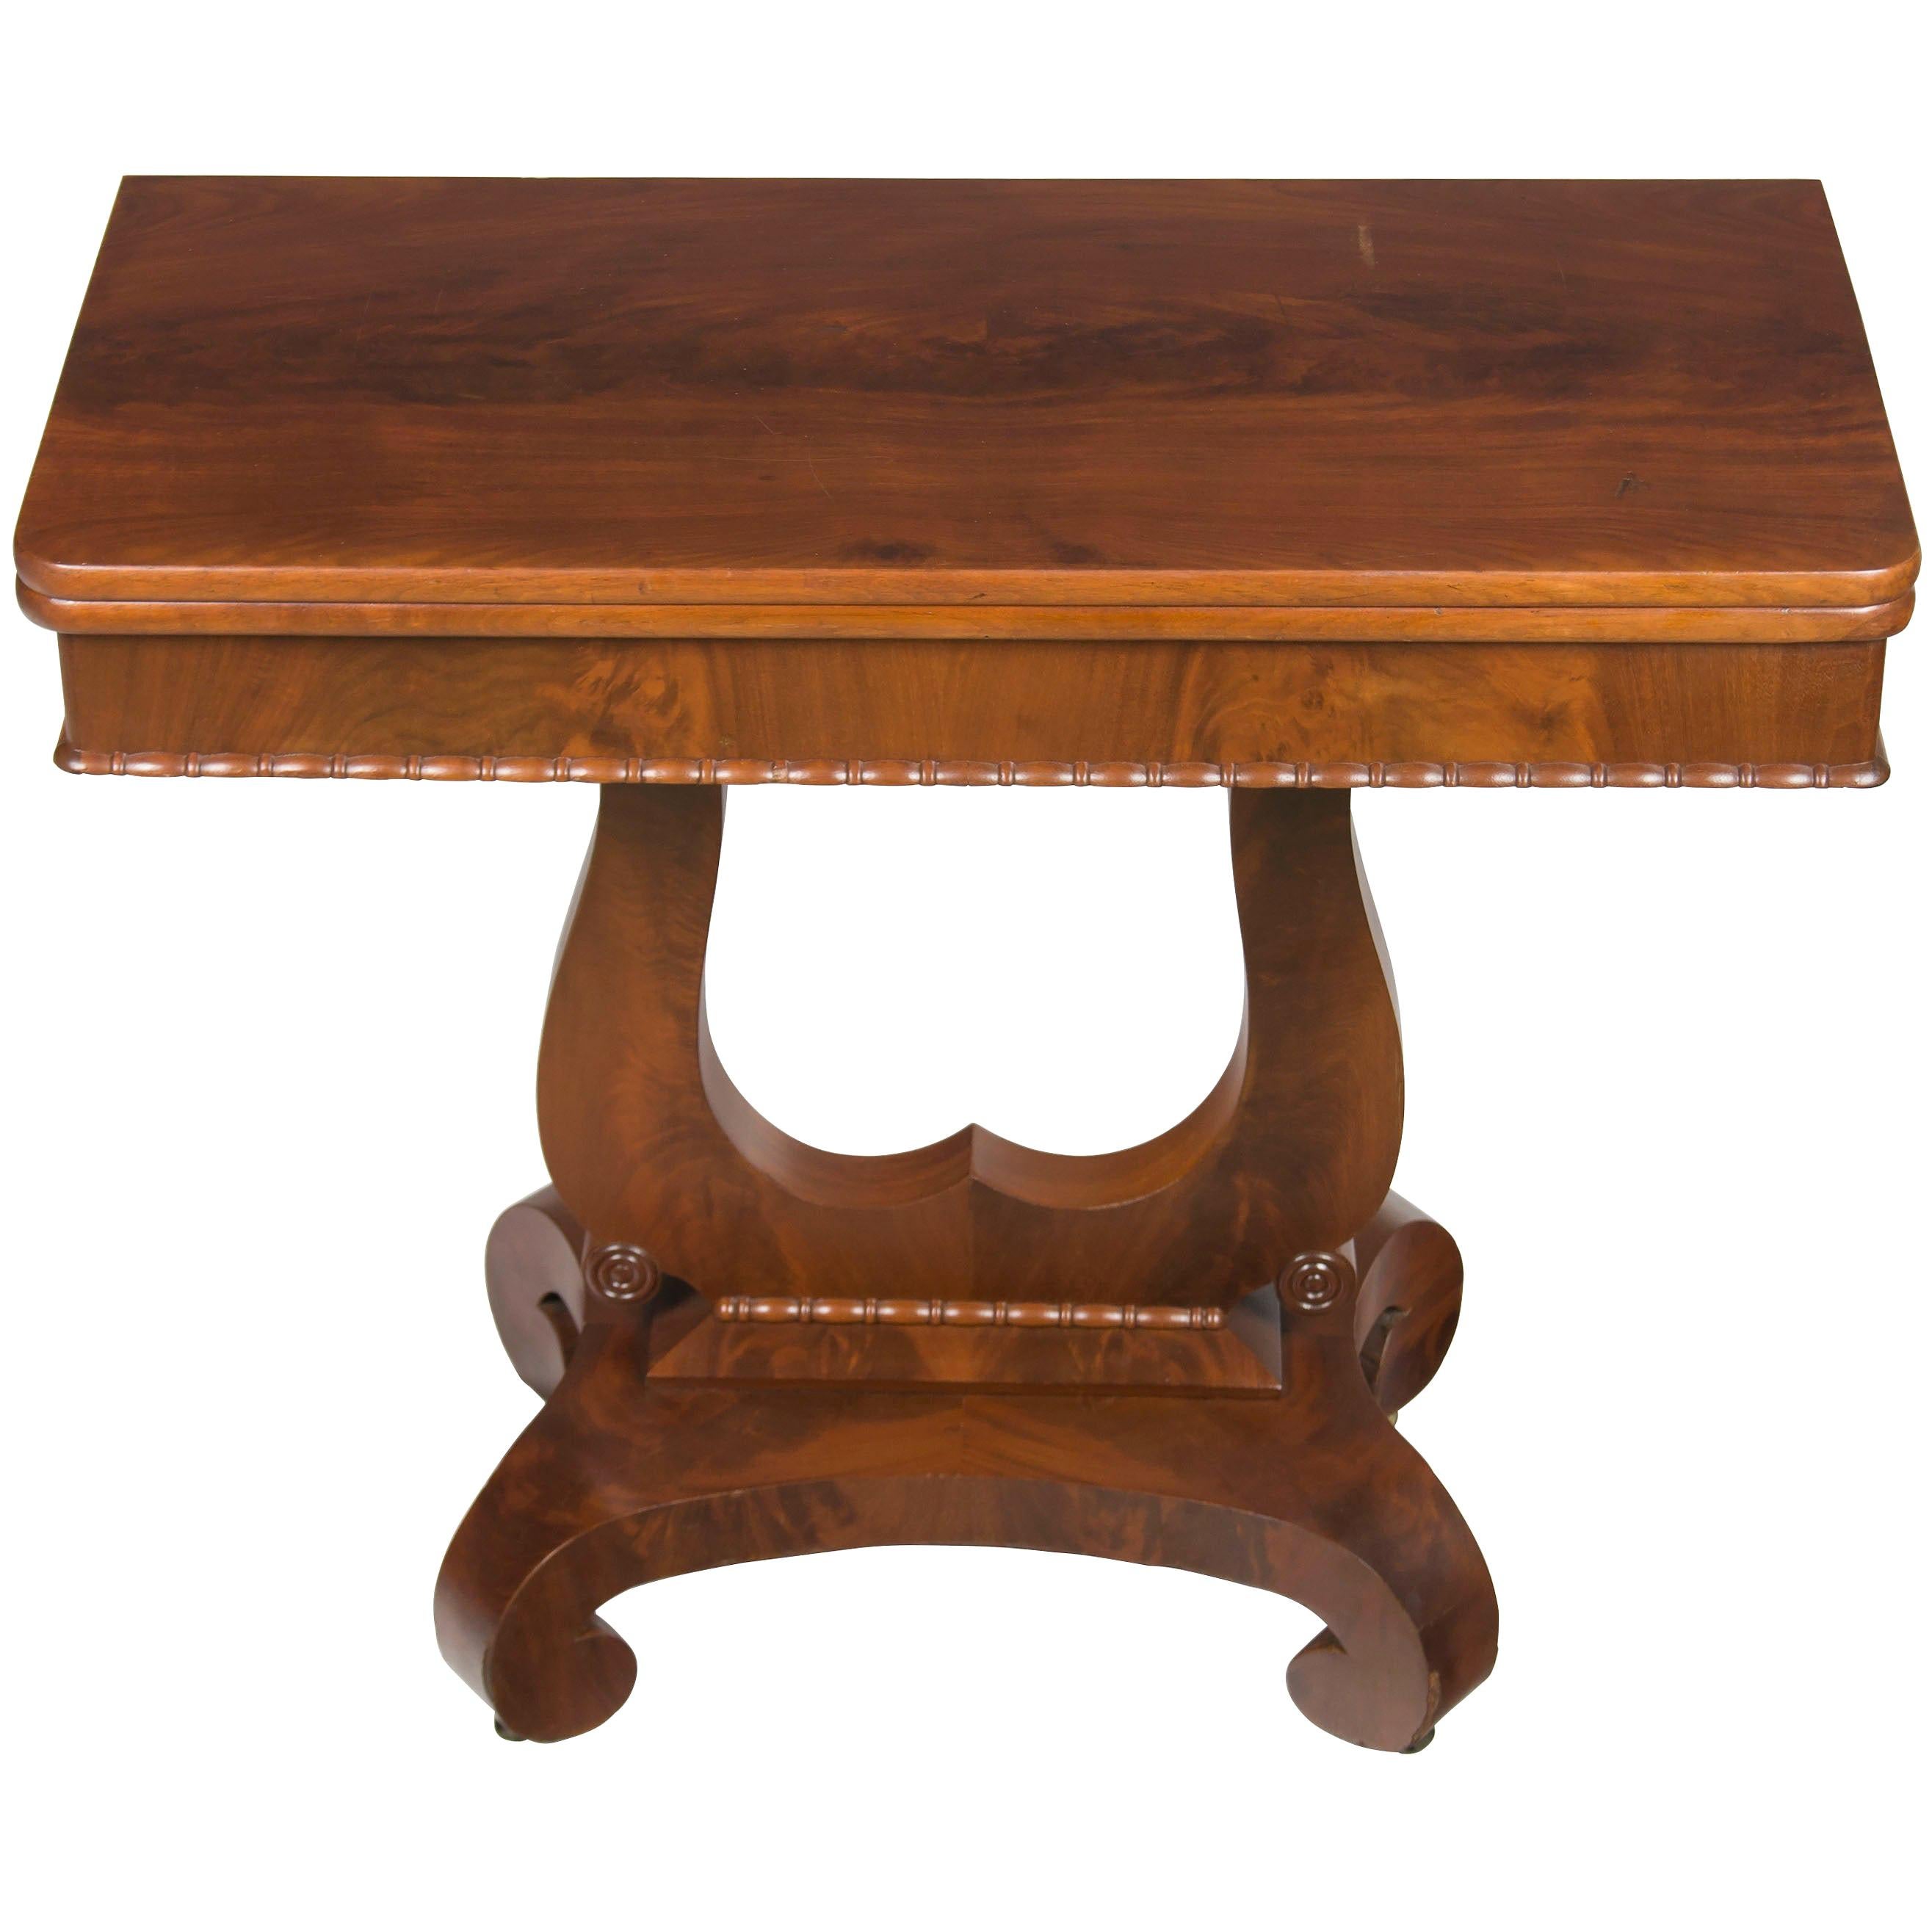 Victorian Period Mahogany Flip Top Card Table on Pedestal Base For Sale